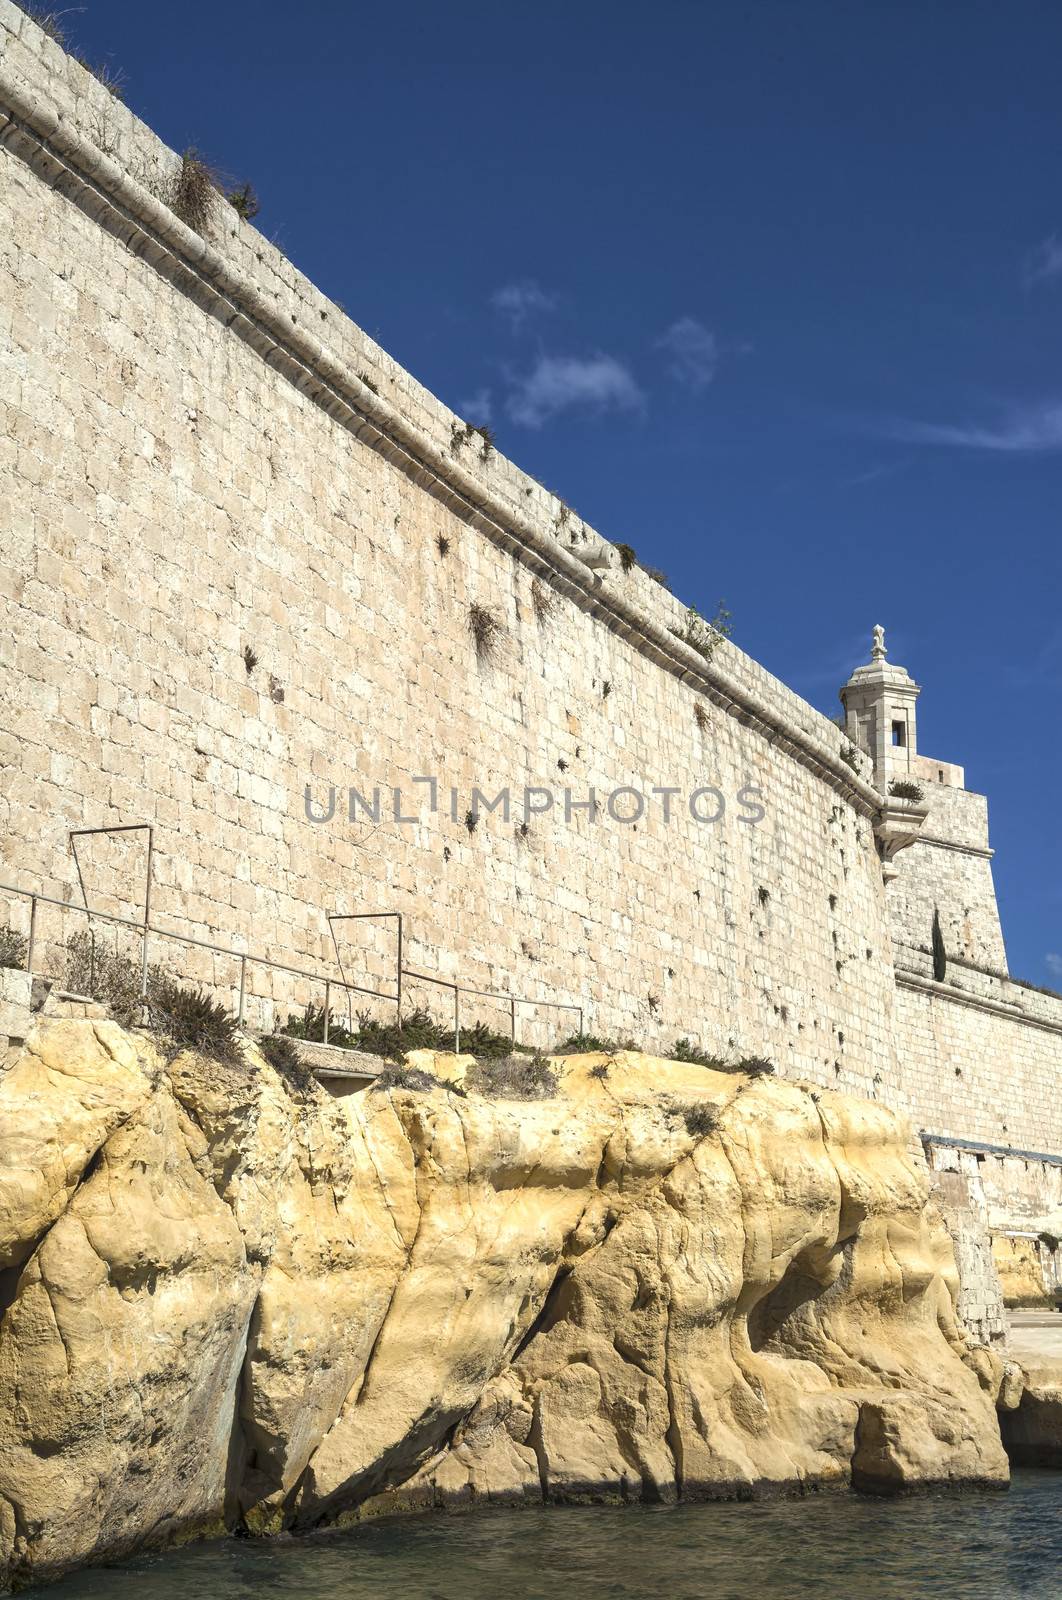 St. Angelo Walls by PhotoWorks